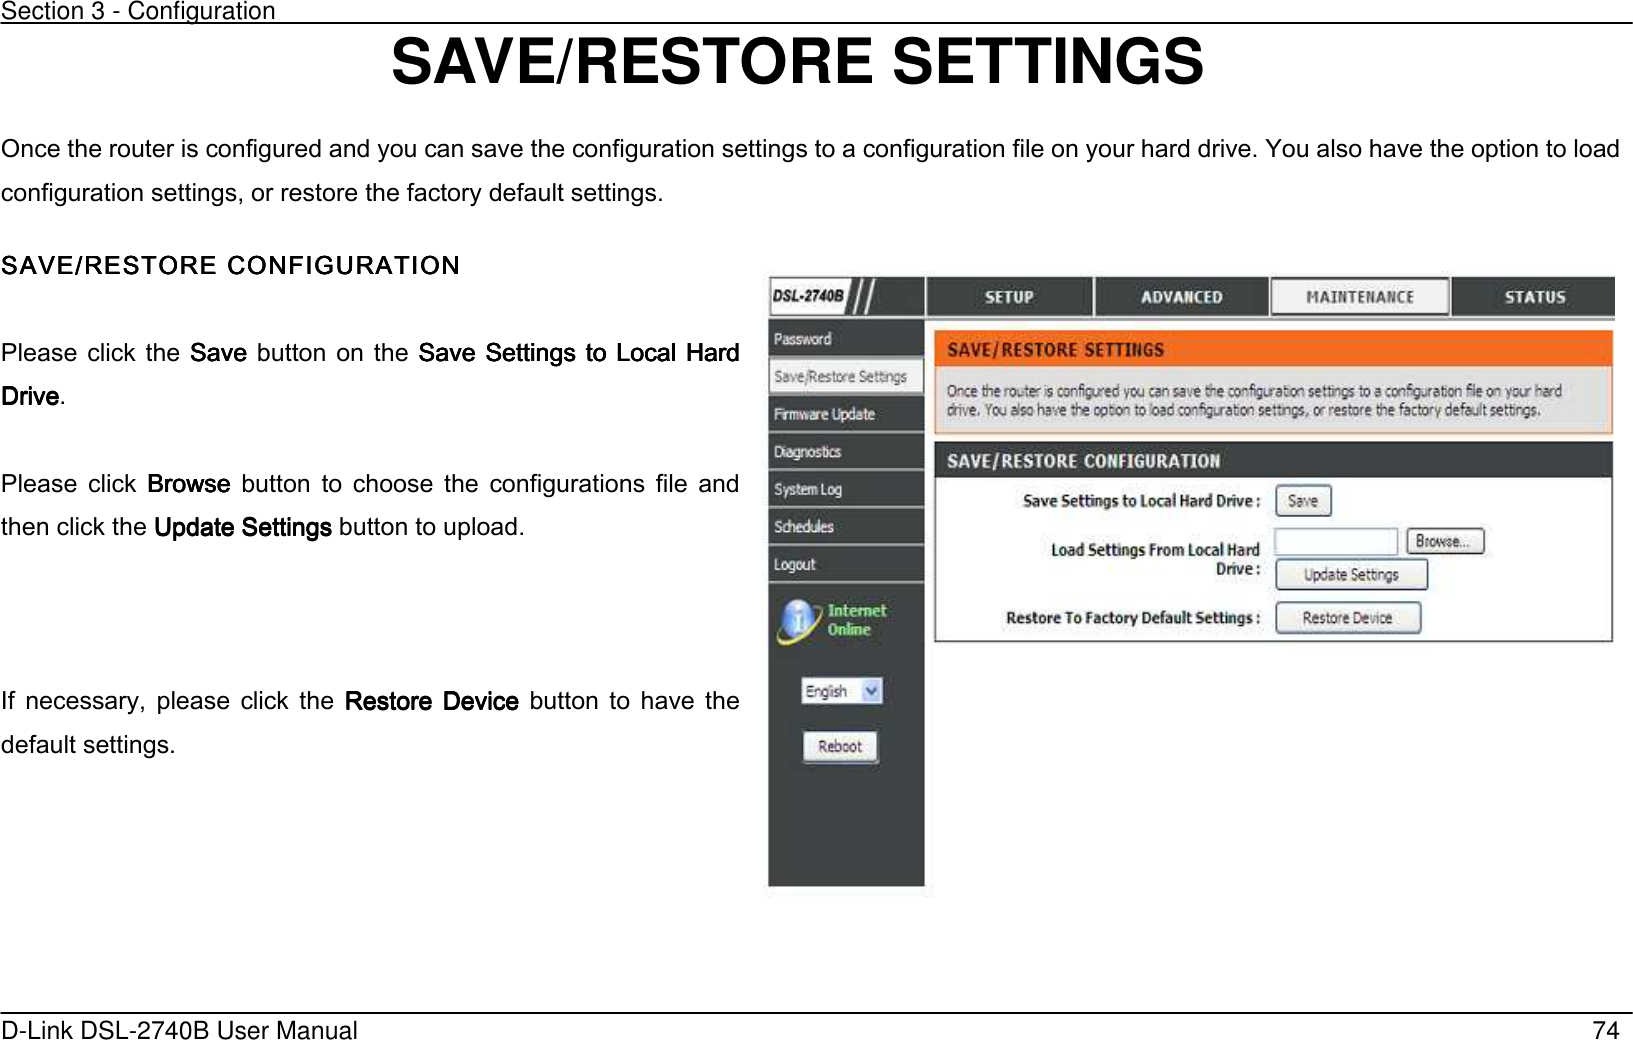 Section 3 - Configuration   D-Link DSL-2740B User Manual                                                  74 SAVE/RESTORE SETTINGS Once the router is configured and you can save the configuration settings to a configuration file on your hard drive. You also have the option to load configuration settings, or restore the factory default settings. SAVE/RESTORE CONFIGSAVE/RESTORE CONFIGSAVE/RESTORE CONFIGSAVE/RESTORE CONFIGURATIONURATIONURATIONURATION     Please  click the  SaveSaveSaveSave  button on  the  Save  Settings to Local Hard Save  Settings to Local Hard Save  Settings to Local Hard Save  Settings to Local Hard DriveDriveDriveDrive.  Please  click  BrowseBrowseBrowseBrowse  button  to  choose  the  configurations  file  and then click the Update SettingsUpdate SettingsUpdate SettingsUpdate Settings button to upload.    If  necessary,  please  click  the  Restore  DeviceRestore  DeviceRestore  DeviceRestore  Device  button  to  have  the default settings.      